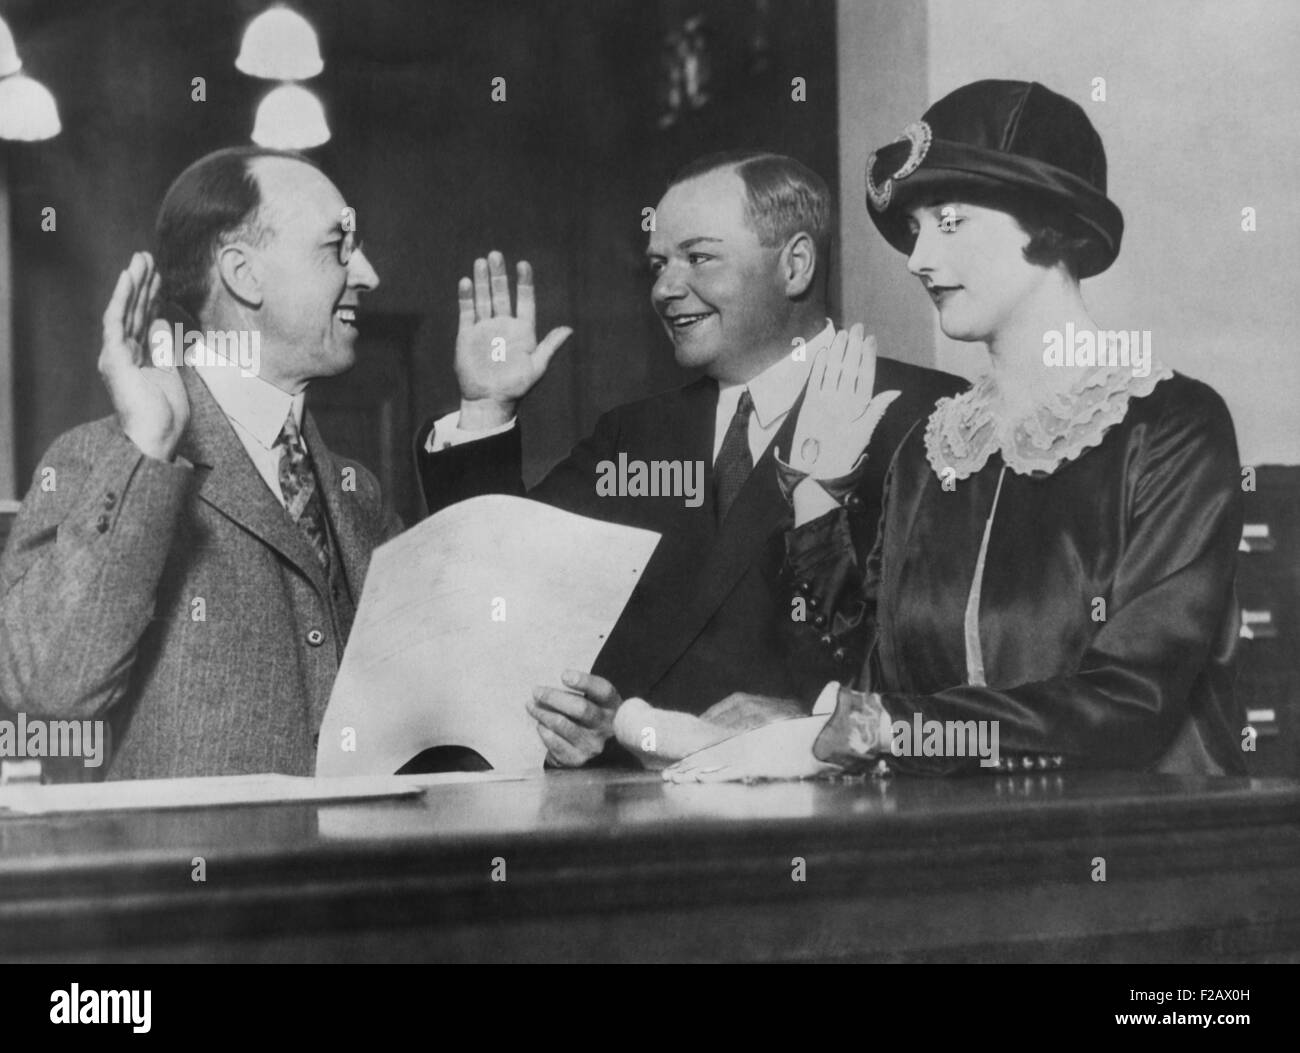 Roscoe 'Fatty' Arbuckle, and Doris Deane took out a marriage license on March 23, 1925. They married on May 16, 1925 and divorced in 1929. (CSU 2015 11 1189) Stock Photo